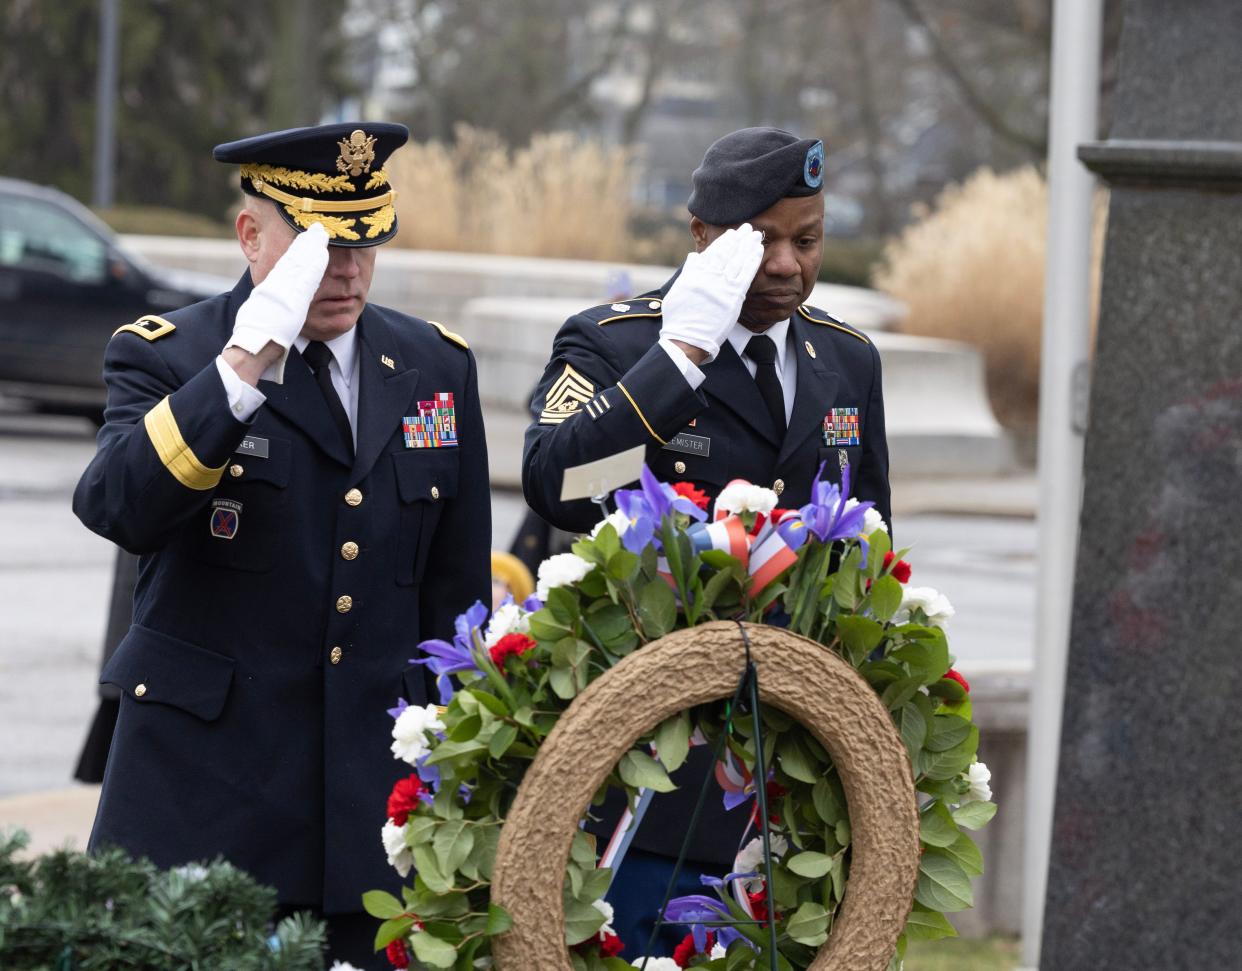 U.S. Army Reserve Maj. Gen. Matthew Baker, left, and Sgt. Maj. James Flemister, both of the 88th Readiness Division, lay a wreath at the McKinley Memorial on behalf of President Joe Biden in Canton Saturday.